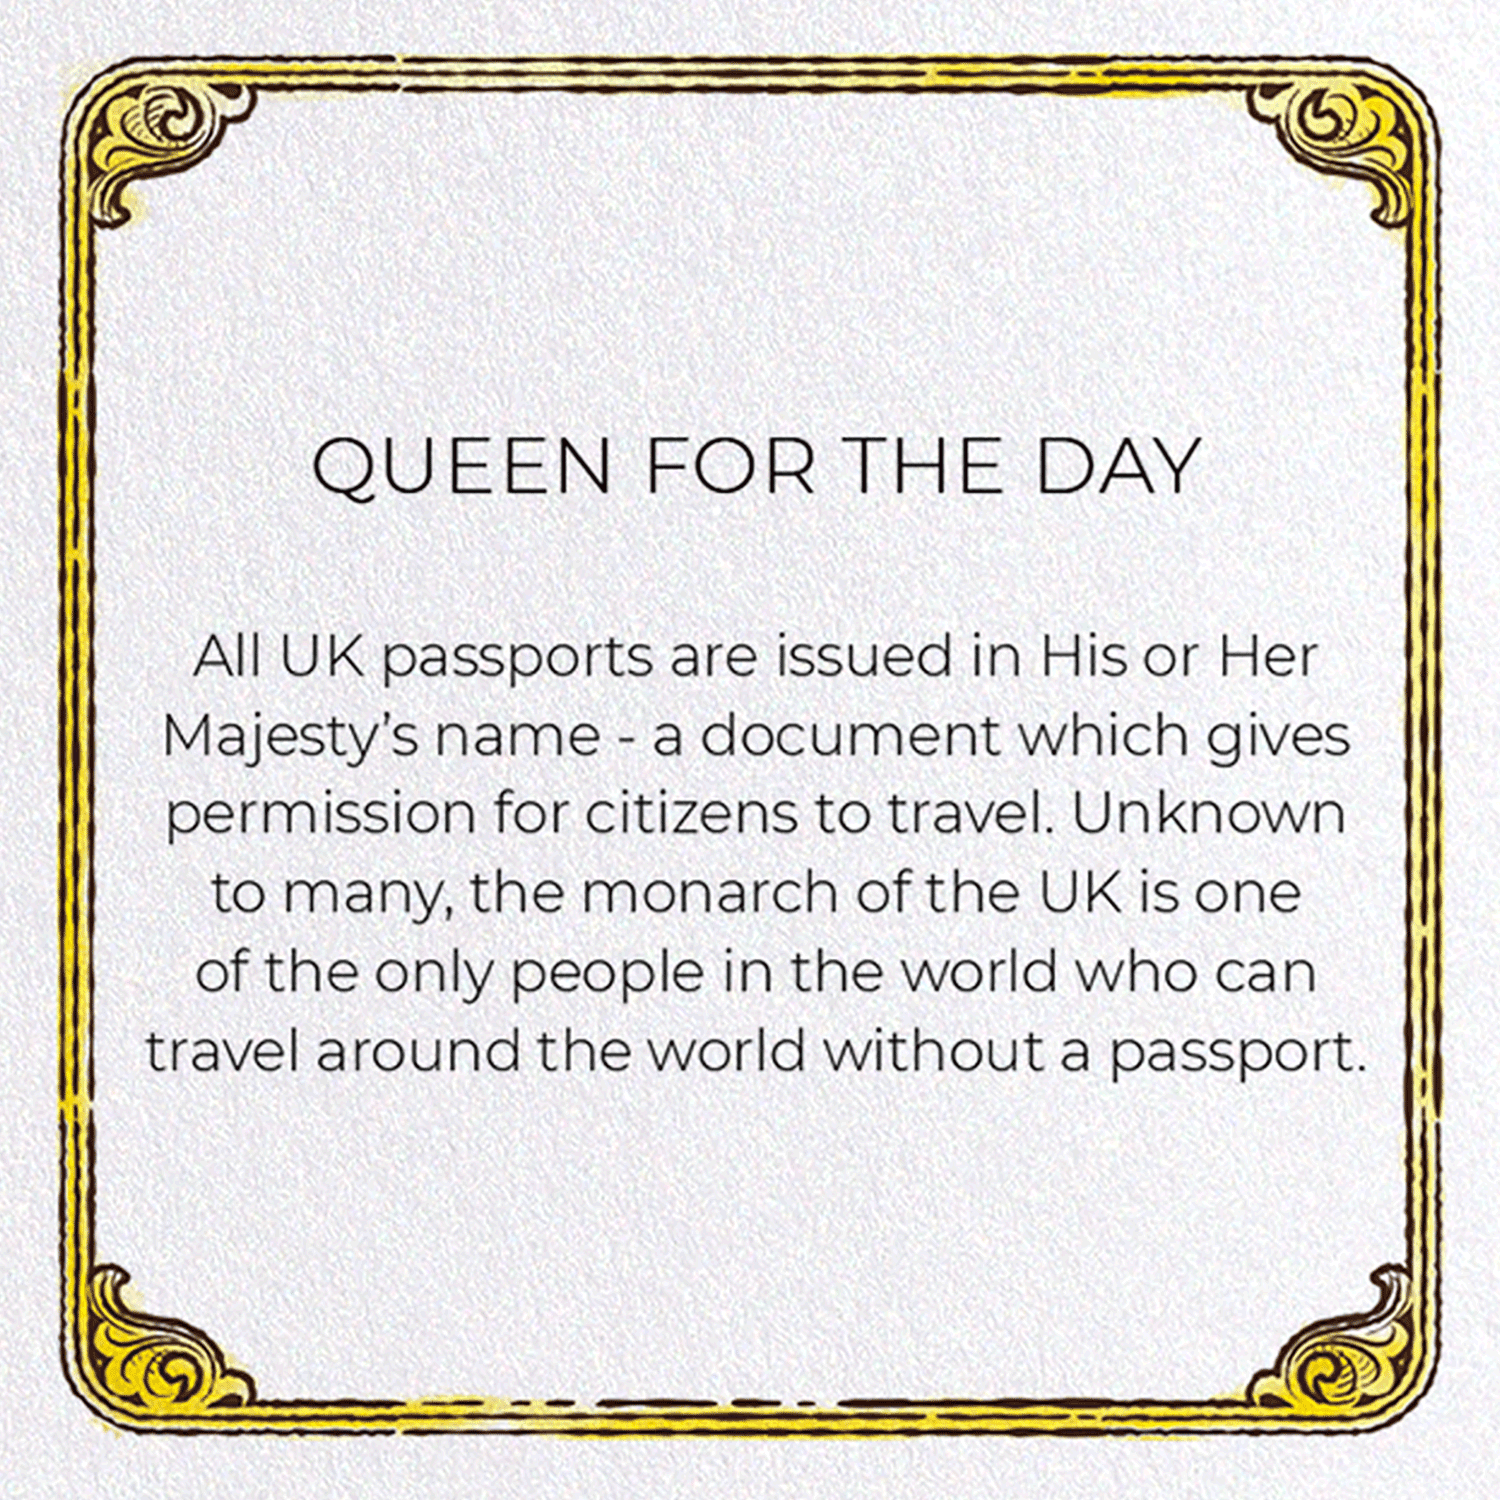 QUEEN FOR THE DAY: Victorian Greeting Card